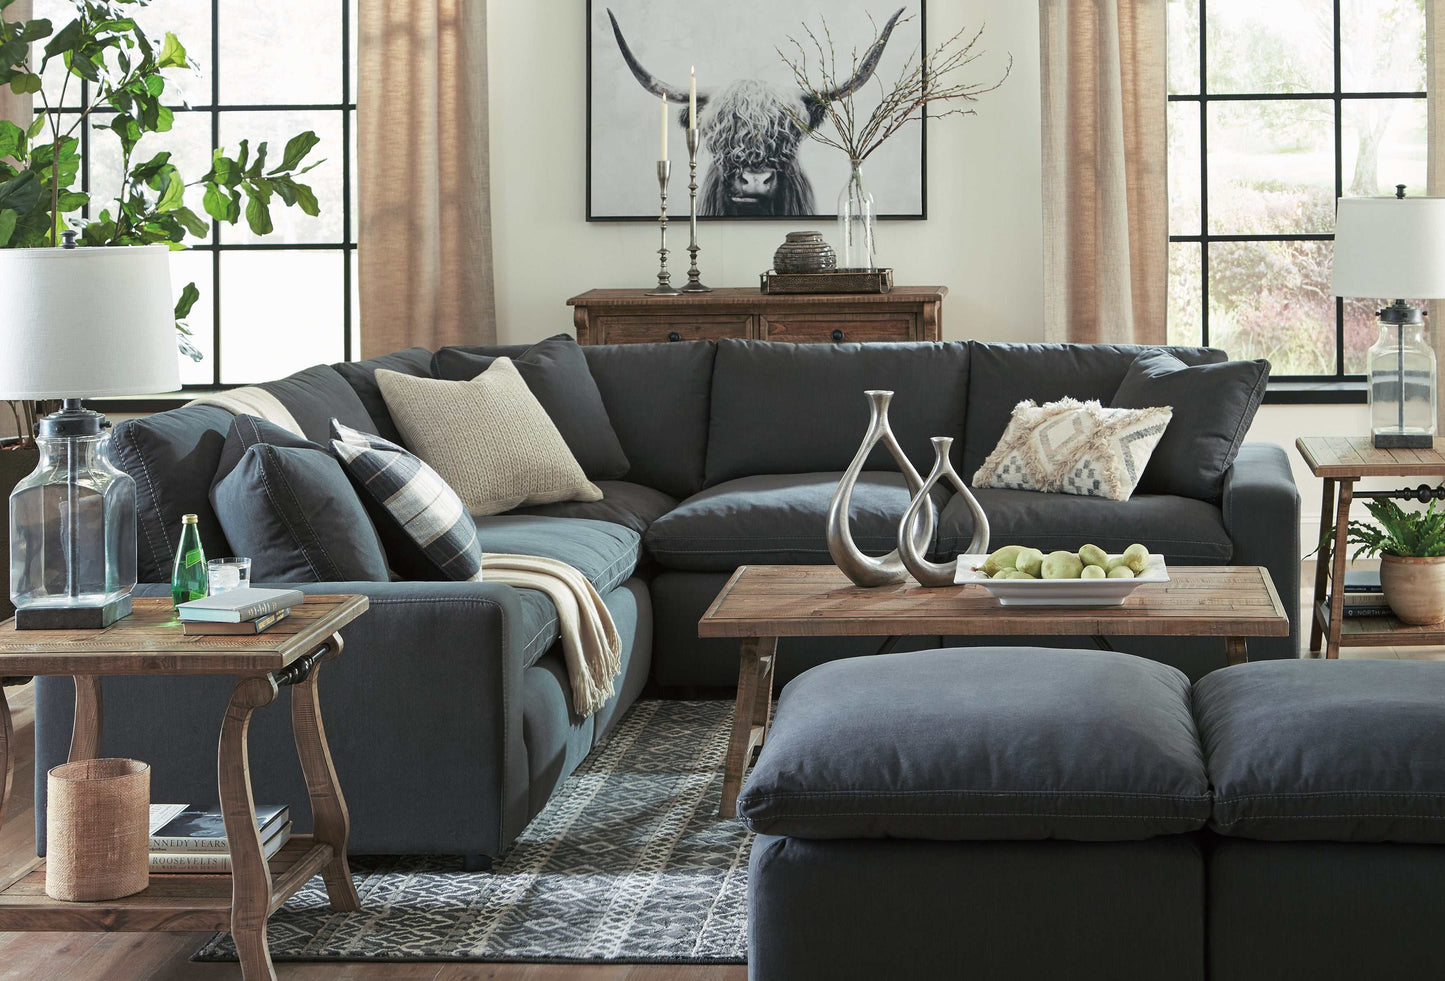 Savesto Charcoal Fabric Modular Sectional Units Create your own Style